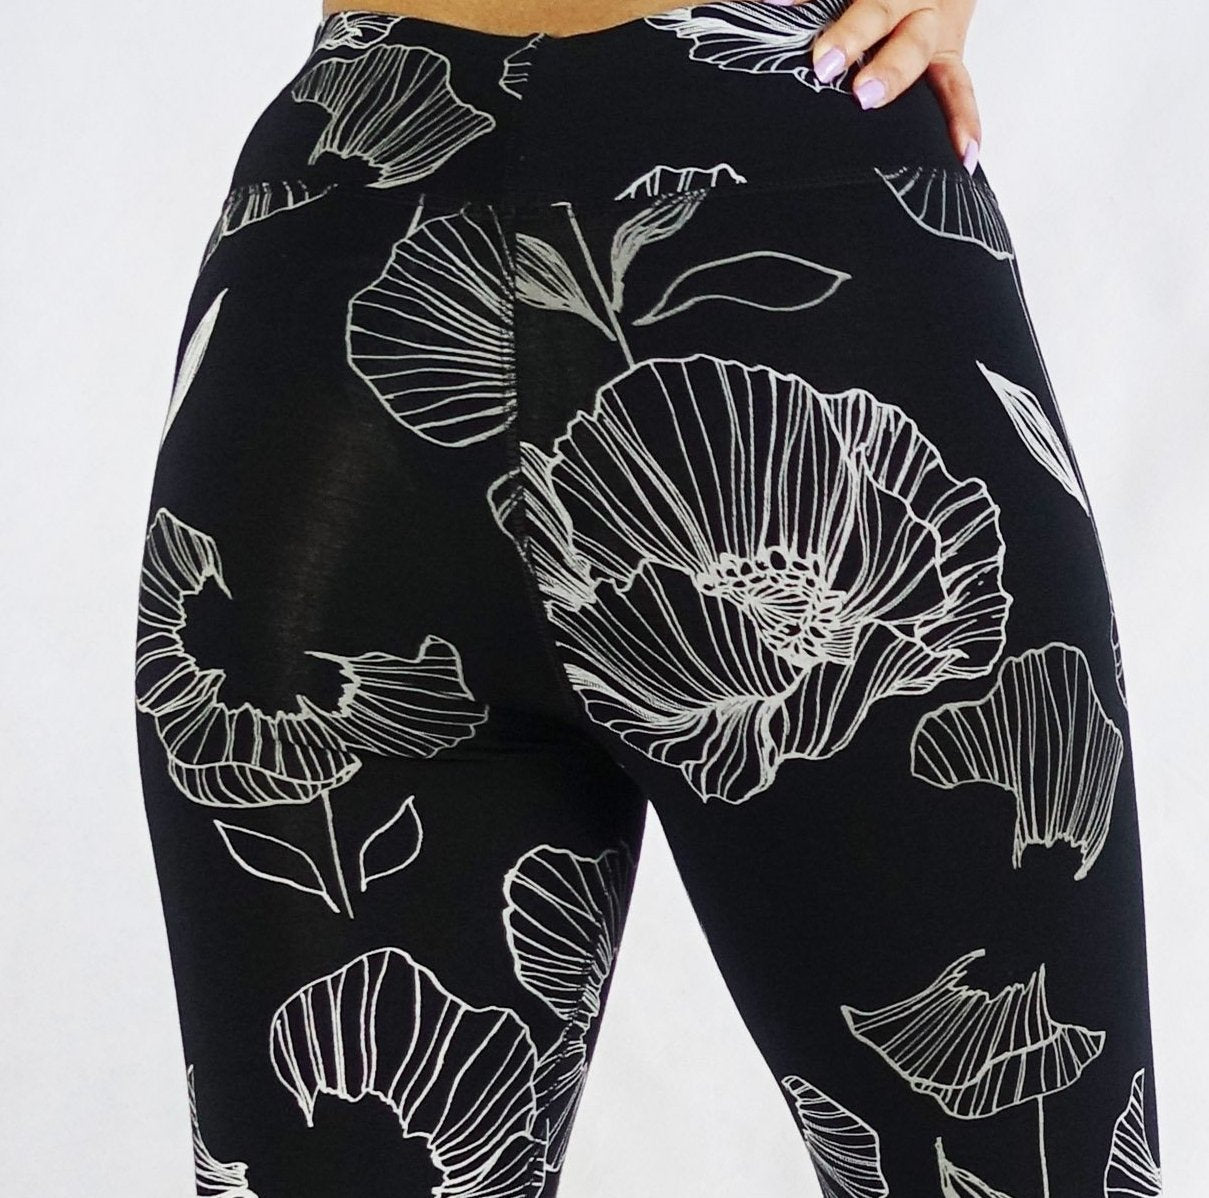 Discover 219+ printed cotton leggings online